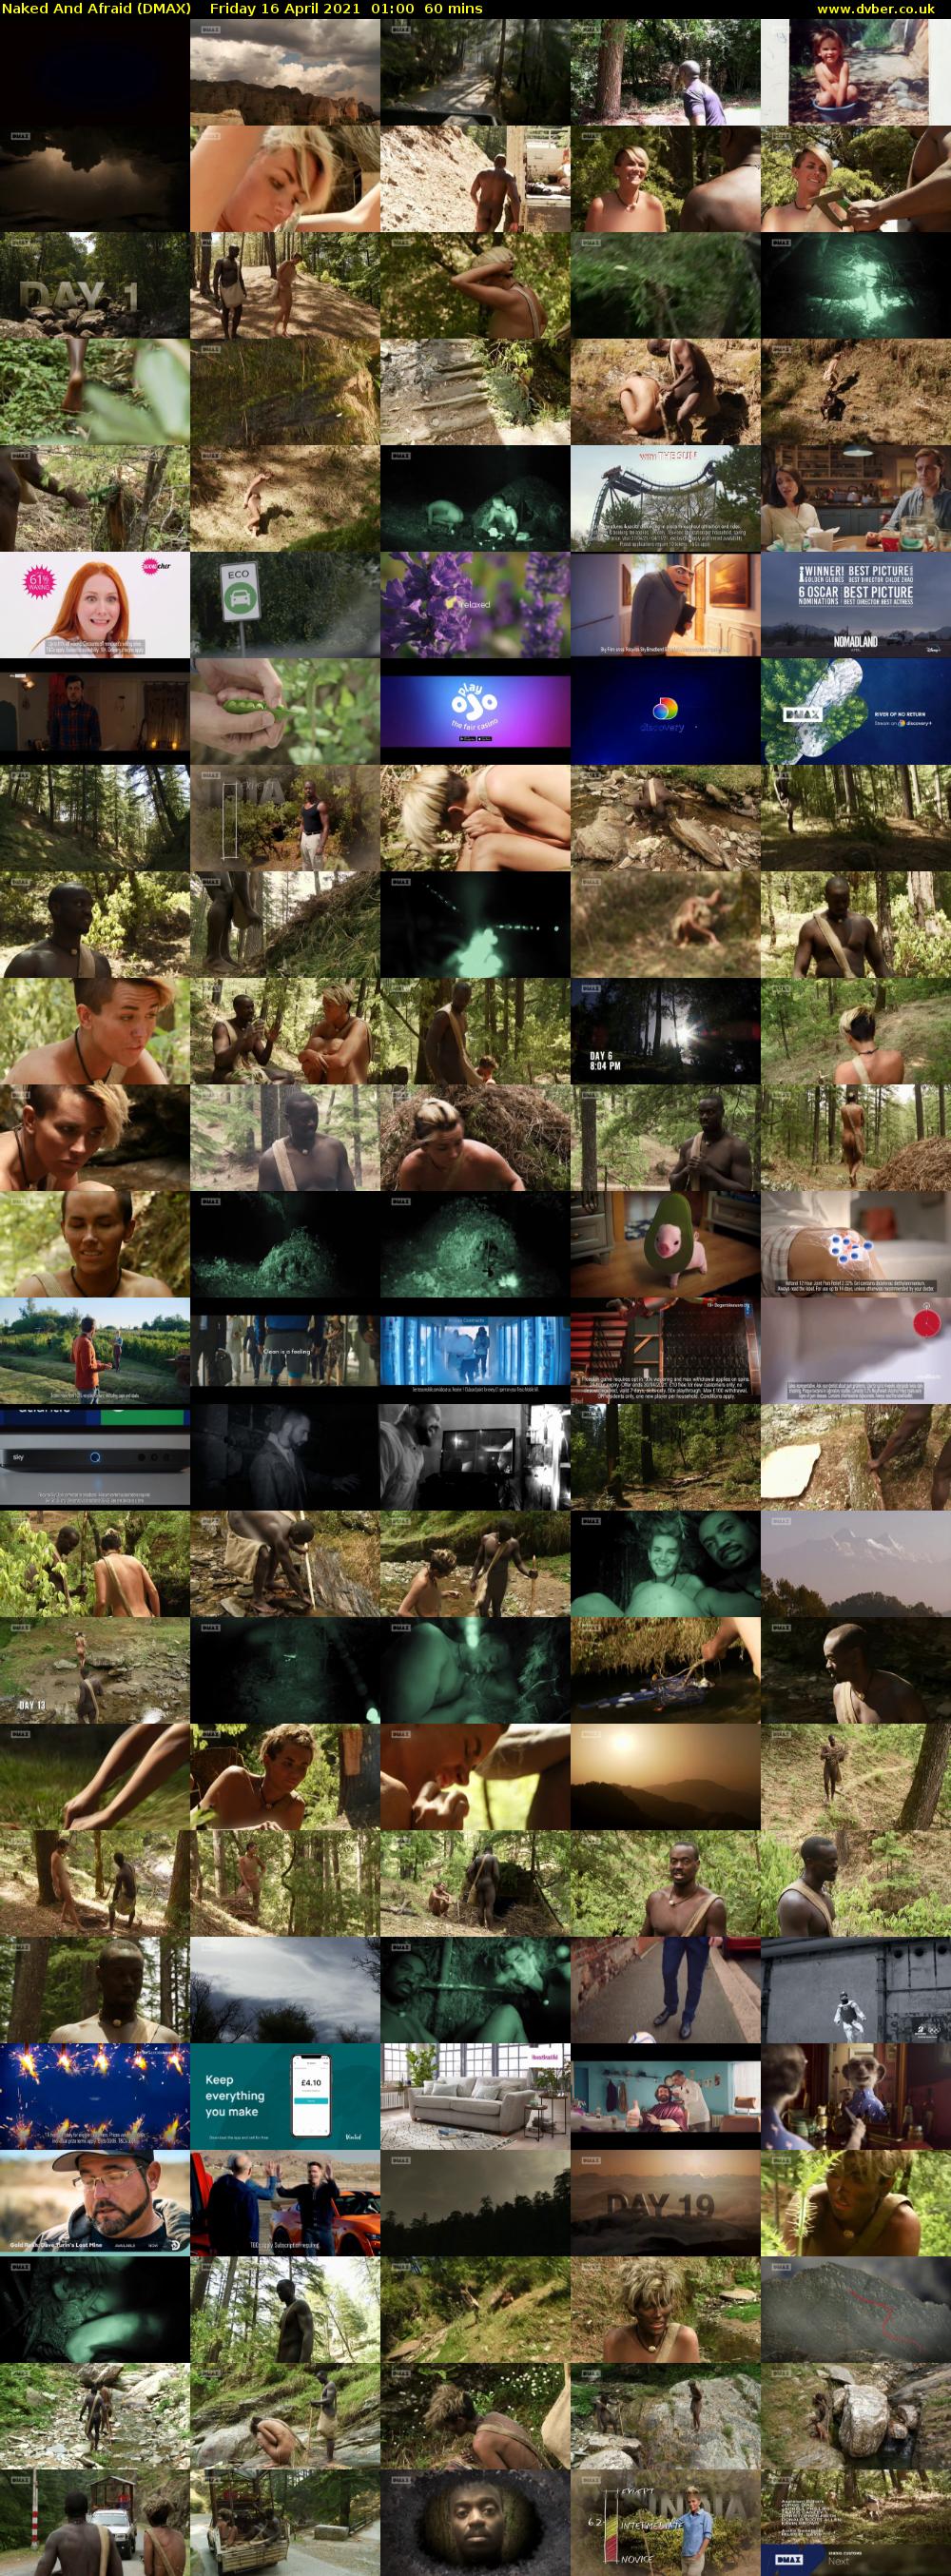 Naked And Afraid (DMAX) Friday 16 April 2021 01:00 - 02:00